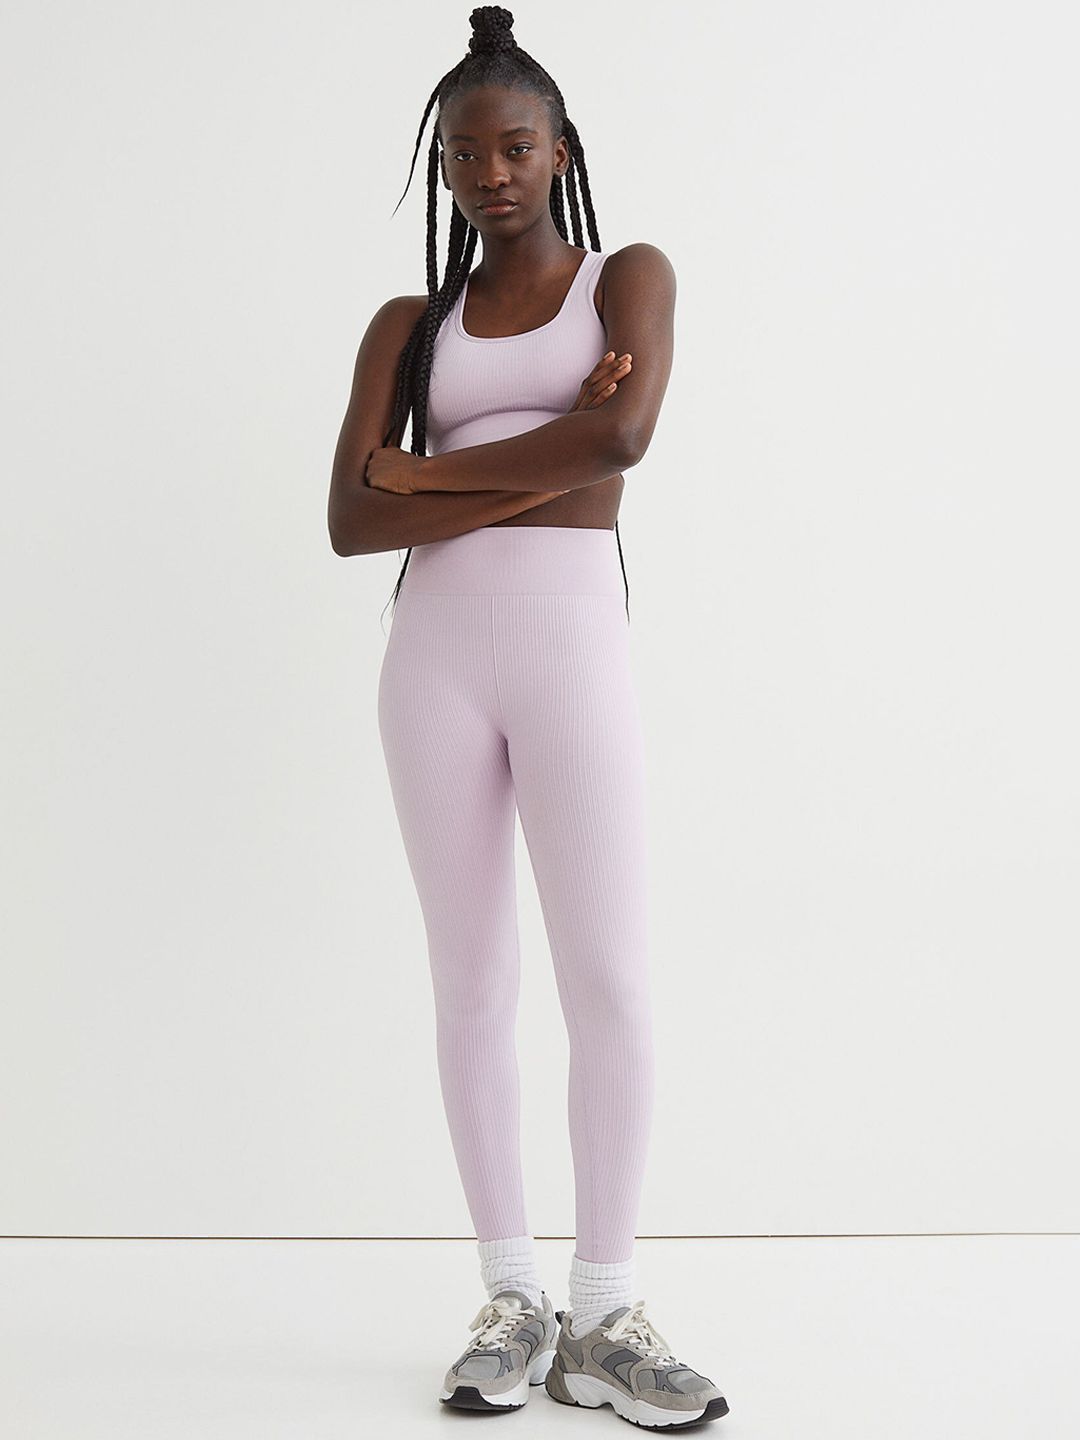 H&M Women Lavender Seamless Sports Tights Price in India